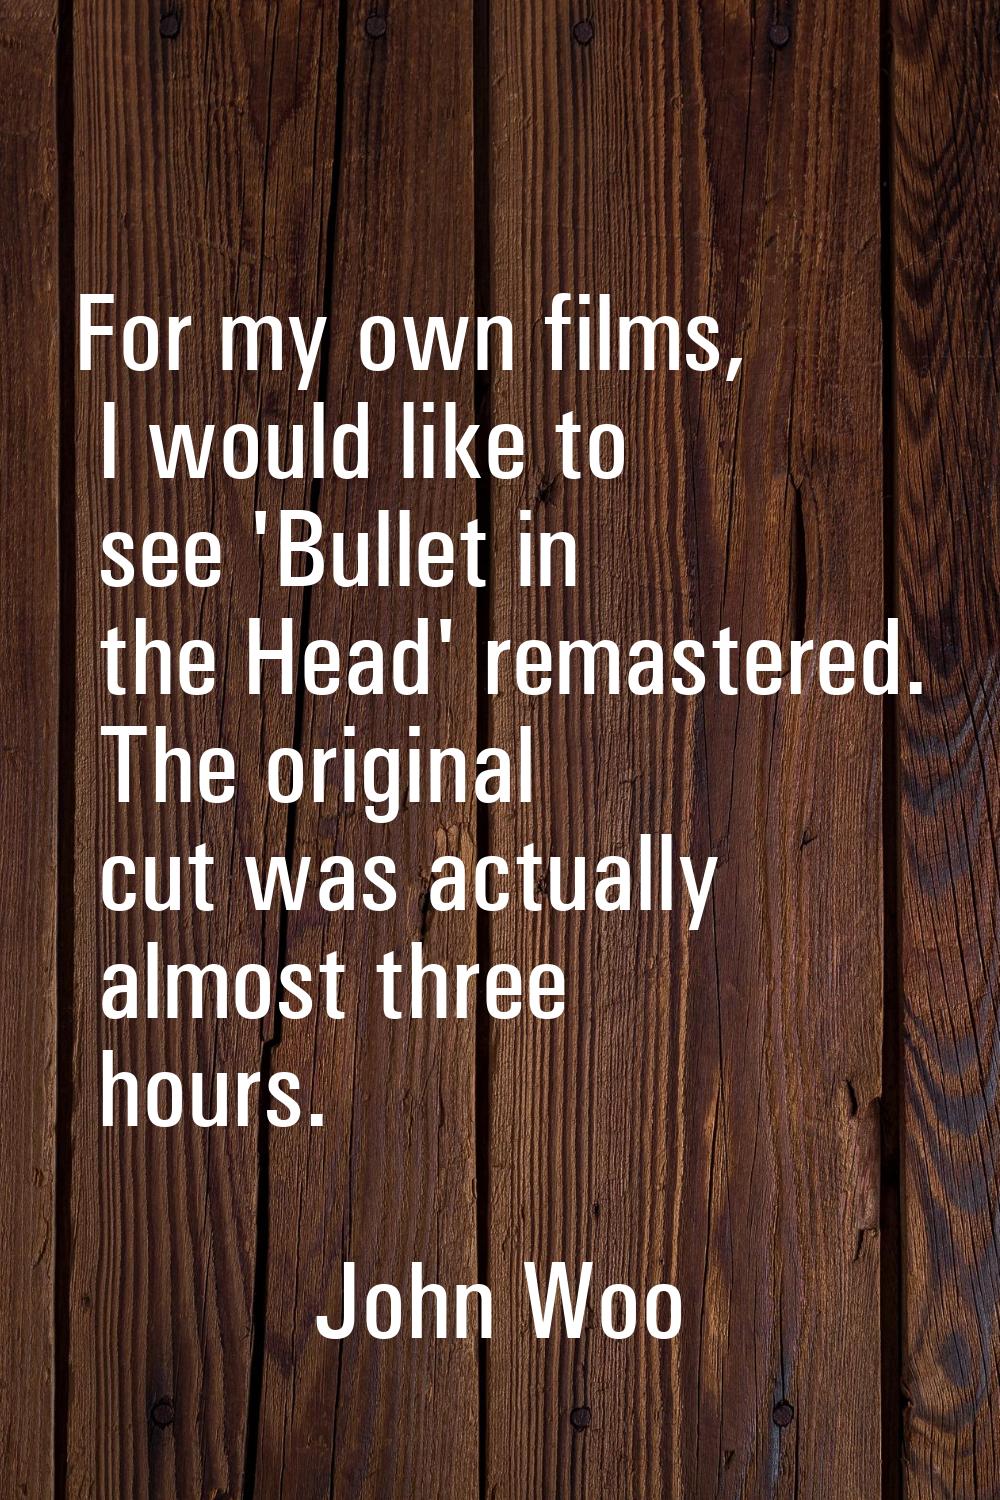 For my own films, I would like to see 'Bullet in the Head' remastered. The original cut was actuall